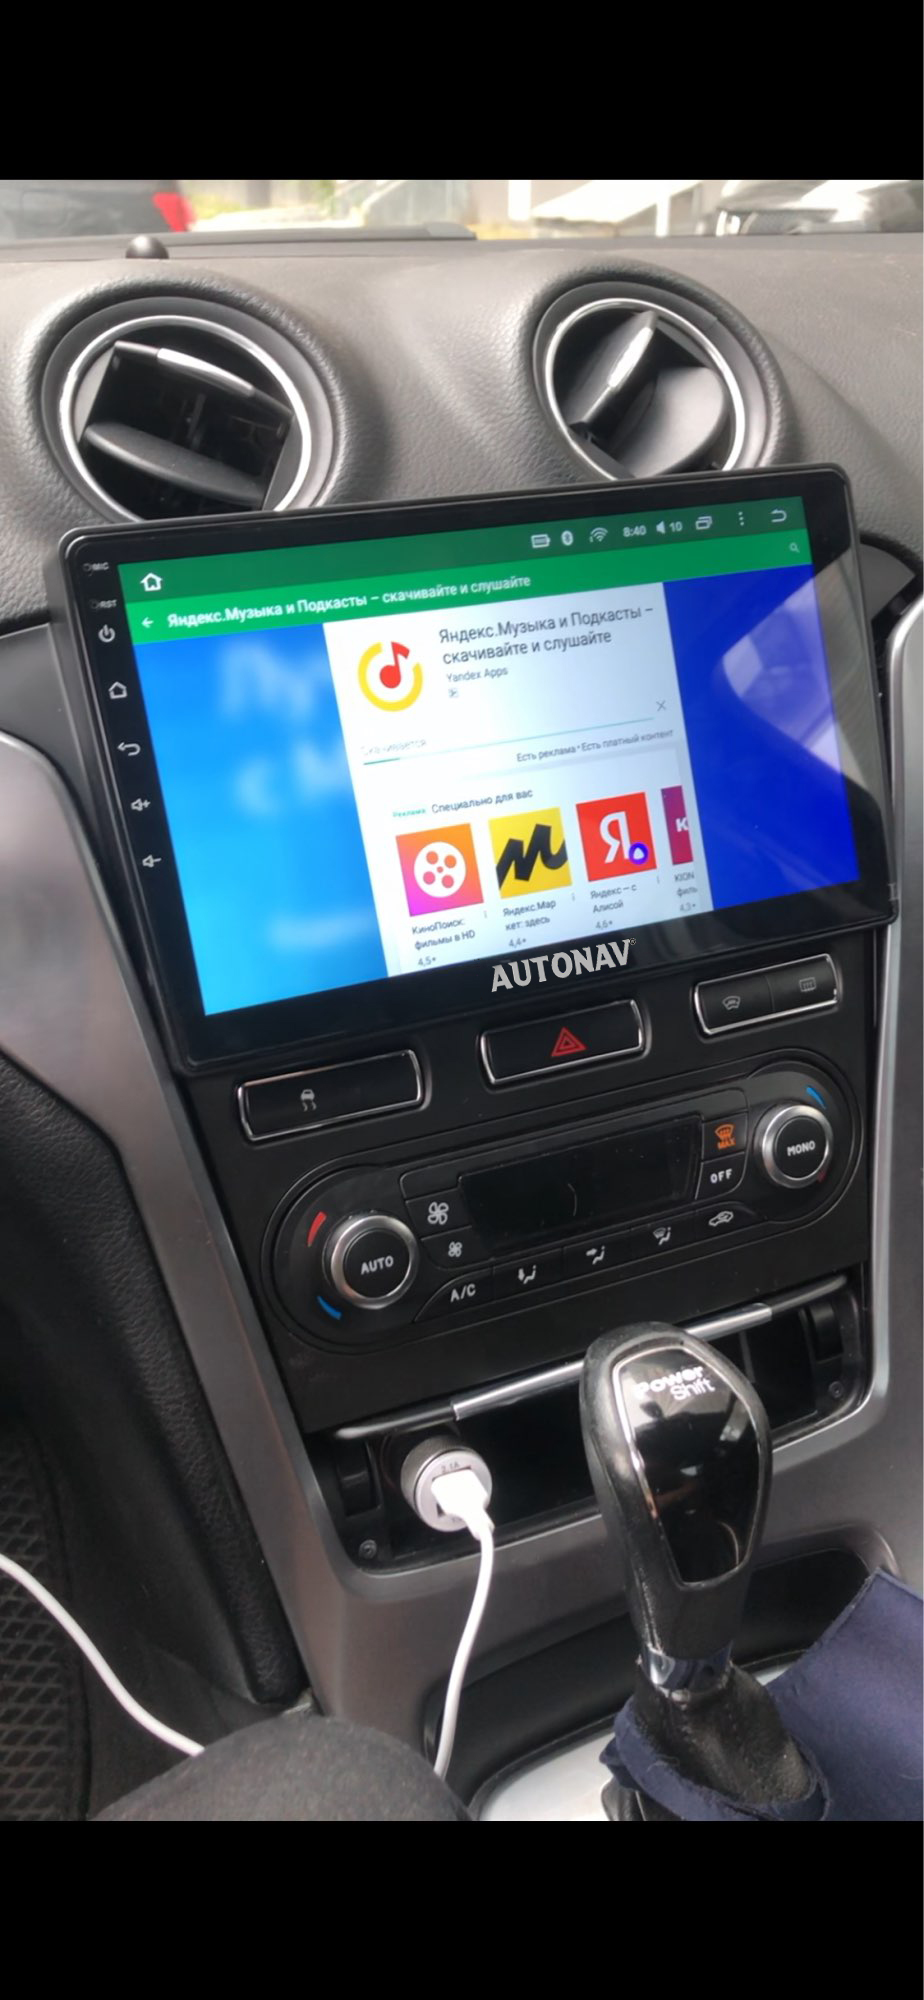 Navigatie AUTONAV ECO Android GPS Dedicata Ford Mondeo 2010-2014, Model Classic, Memorie 16GB Stocare, 1GB DDR3 RAM, Display 10" Full-Touch, WiFi, 2 x USB, Bluetooth, CPU Quad-Core 4 * 1.3GHz, 4 * 50W Audio, Intrare Subwoofer, Amplificator